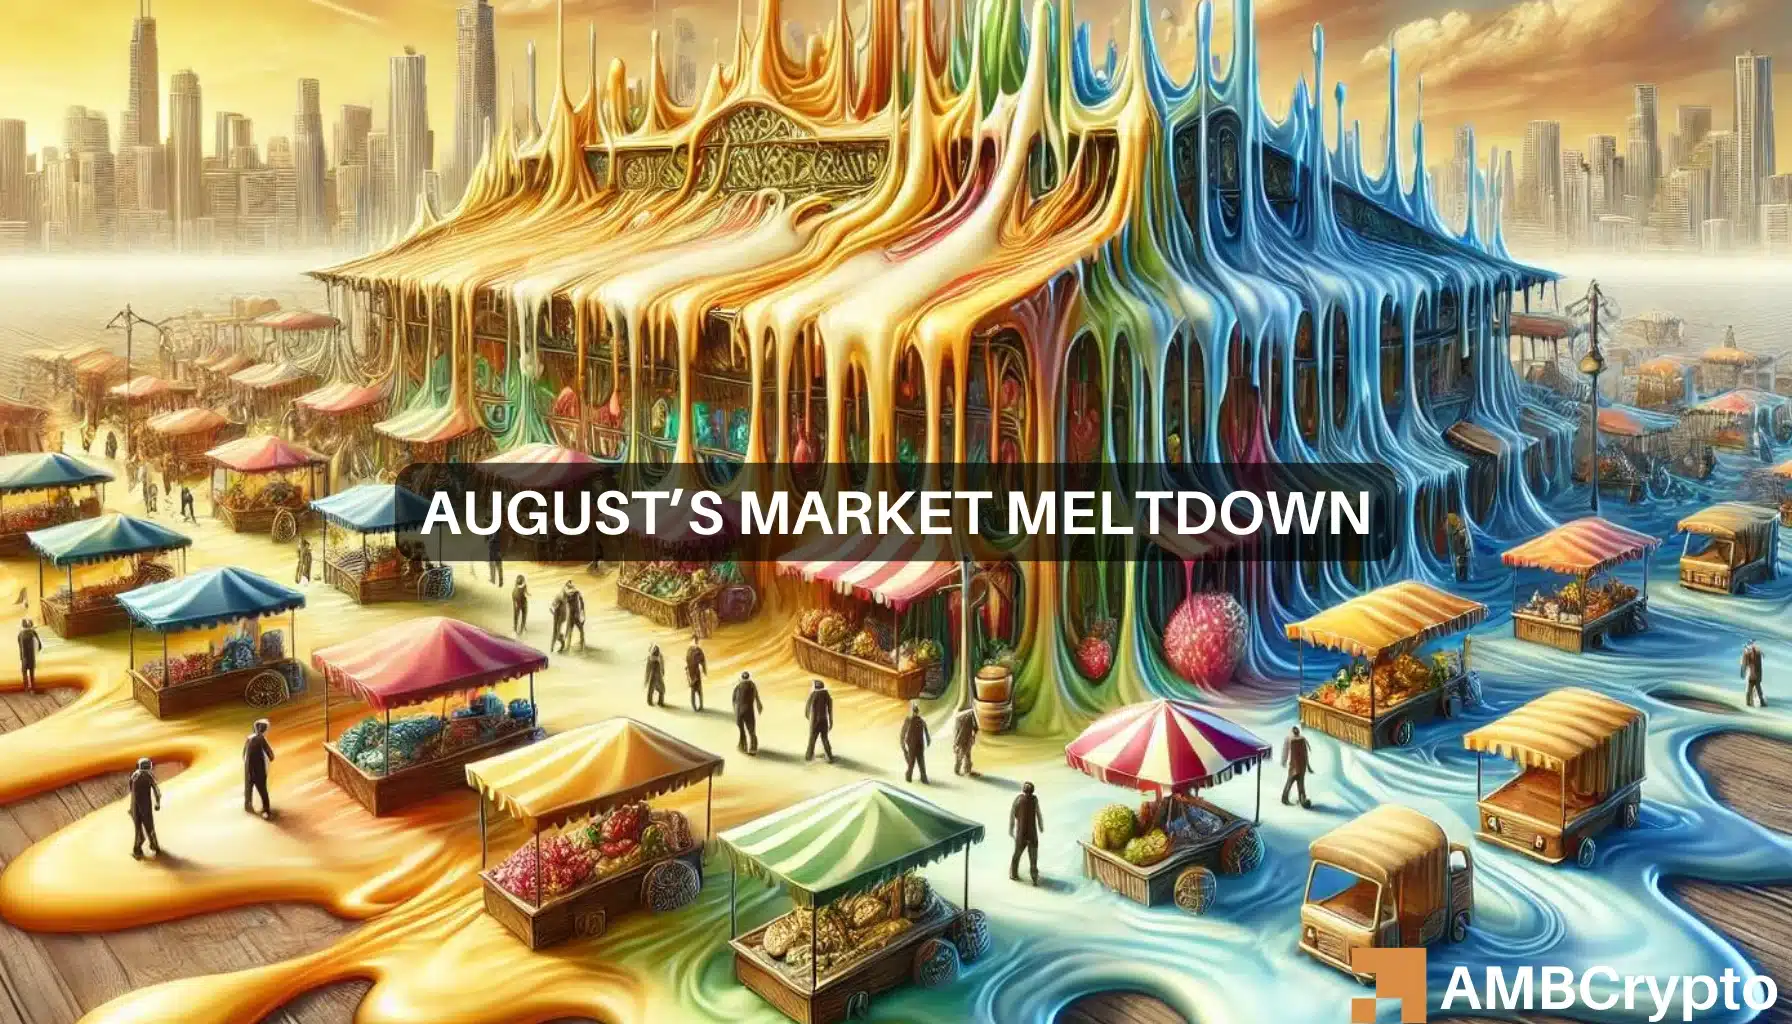 Crypto market meltdown: The real reasons behind the August collapse